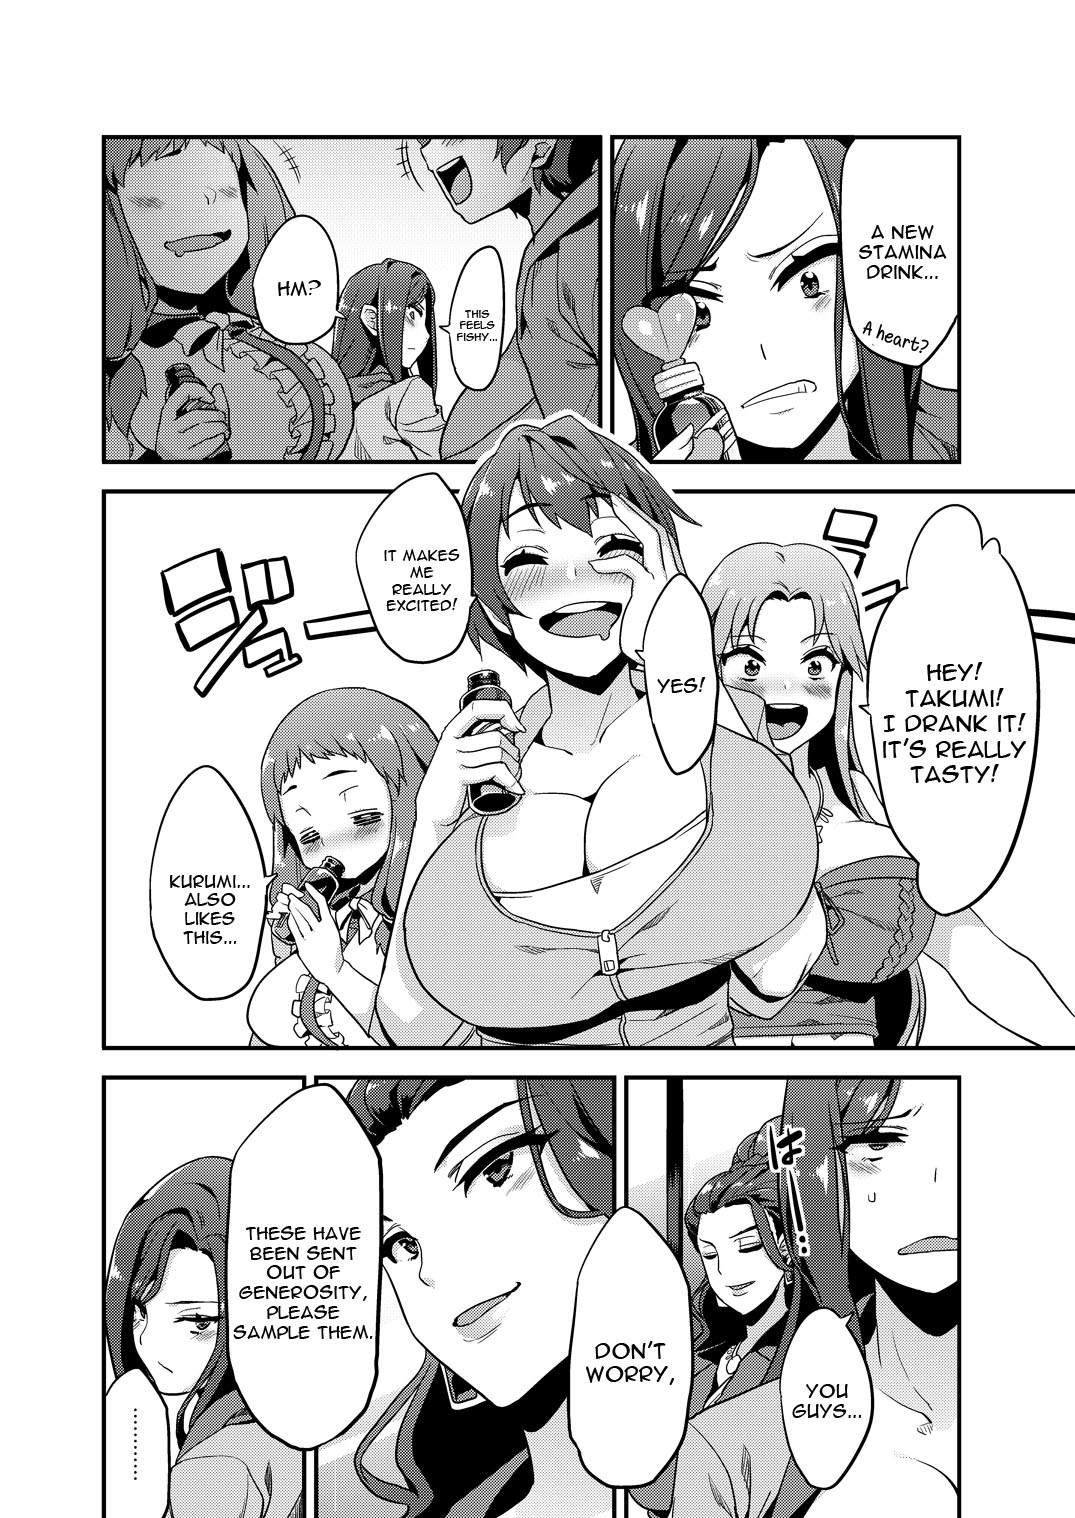 [OVing (Obui)] Hentai Idol Recycle (THE IDOLM@STER CINDERELLA GIRLS) [English] [constantly] [Digital] page 4 full